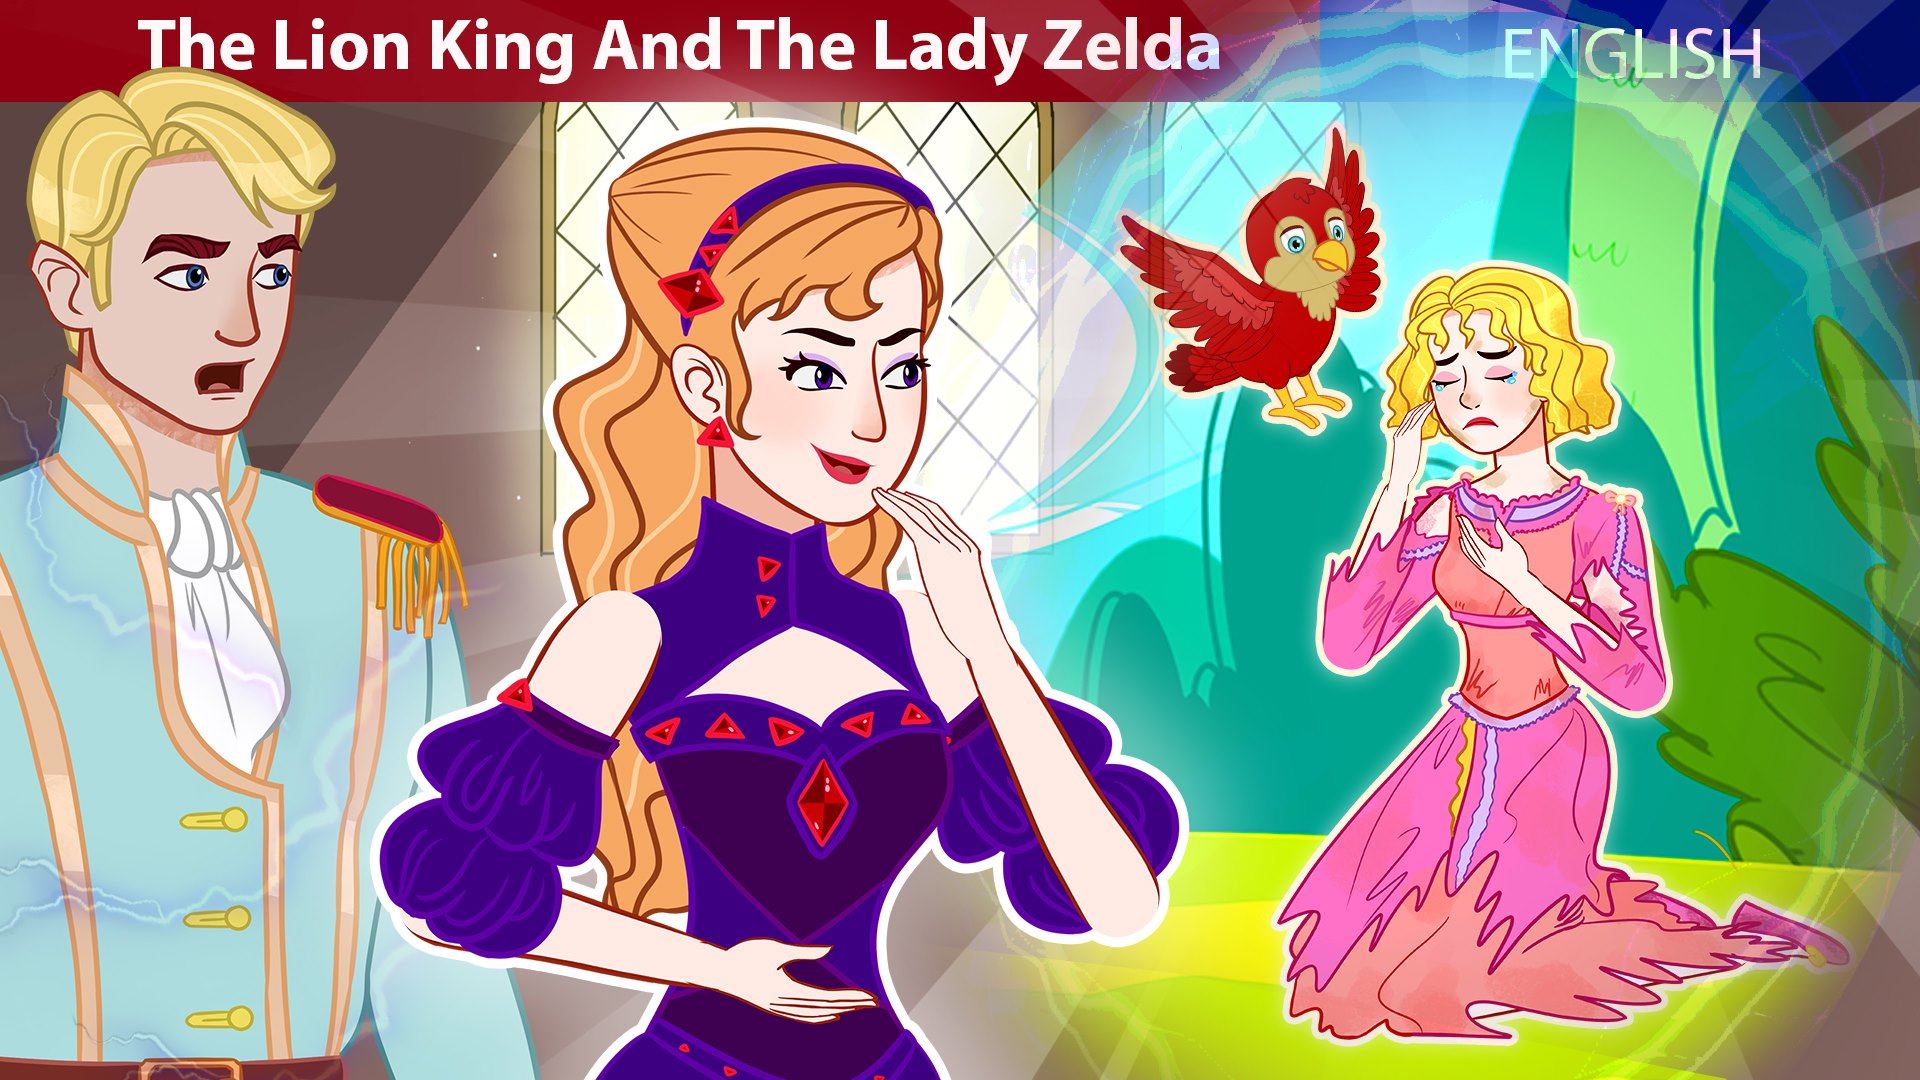 The Lion King And The Lady Zelda | Stories for Teenagers